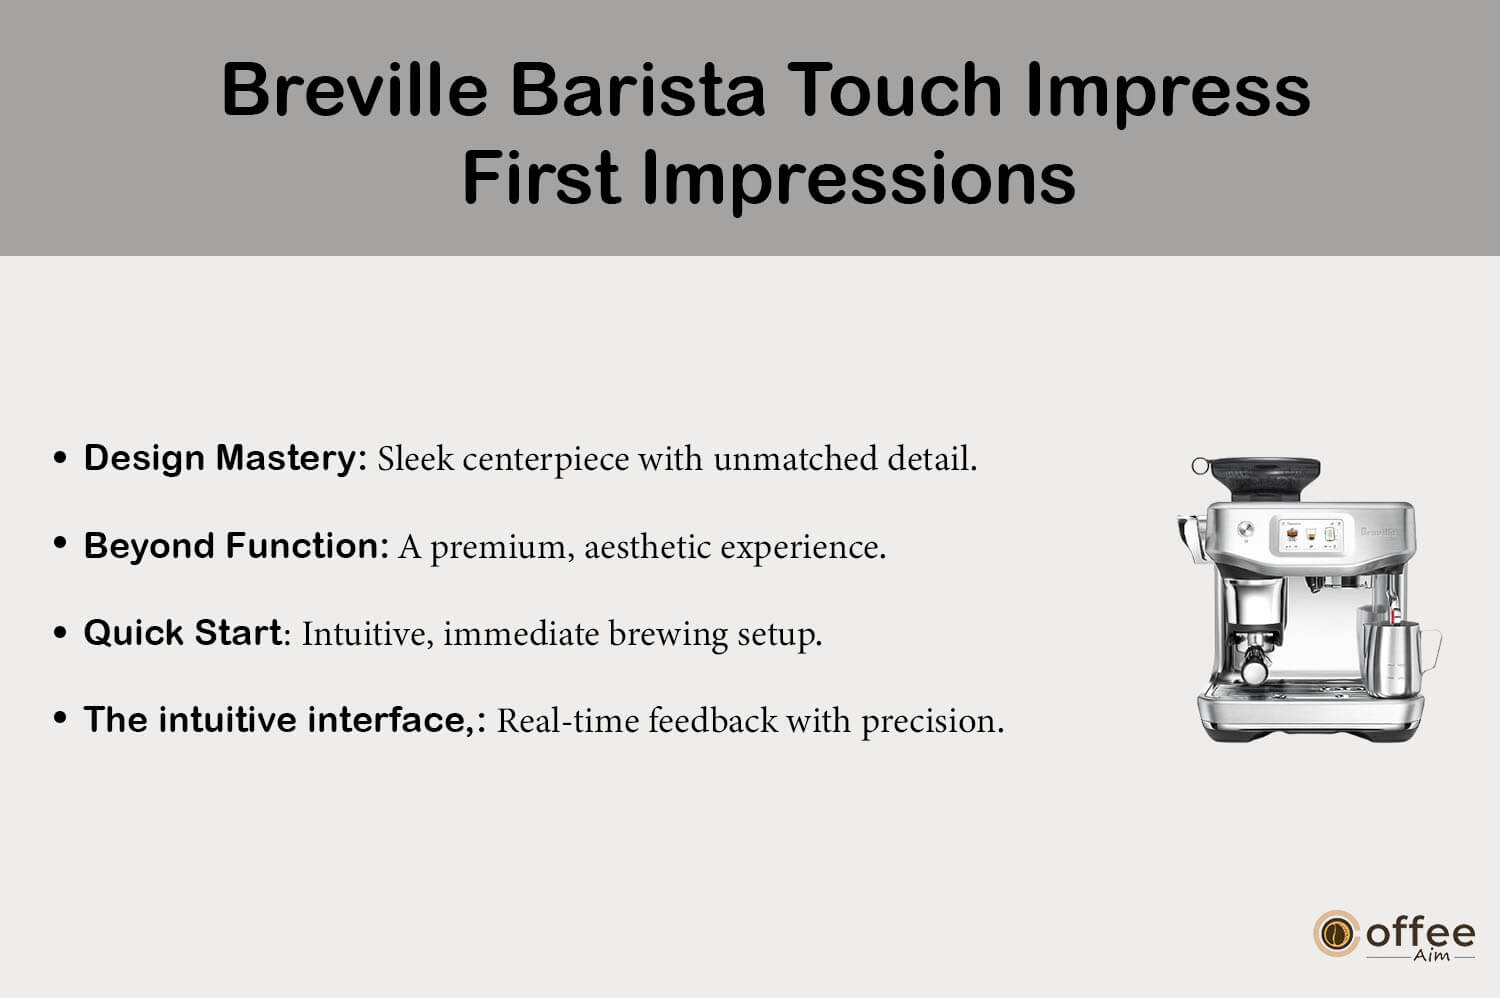 "This graphic captures the initial impressions of the 'Breville Barista Touch Impress', as highlighted in our comprehensive 'Breville Barista Touch Impress Review'."